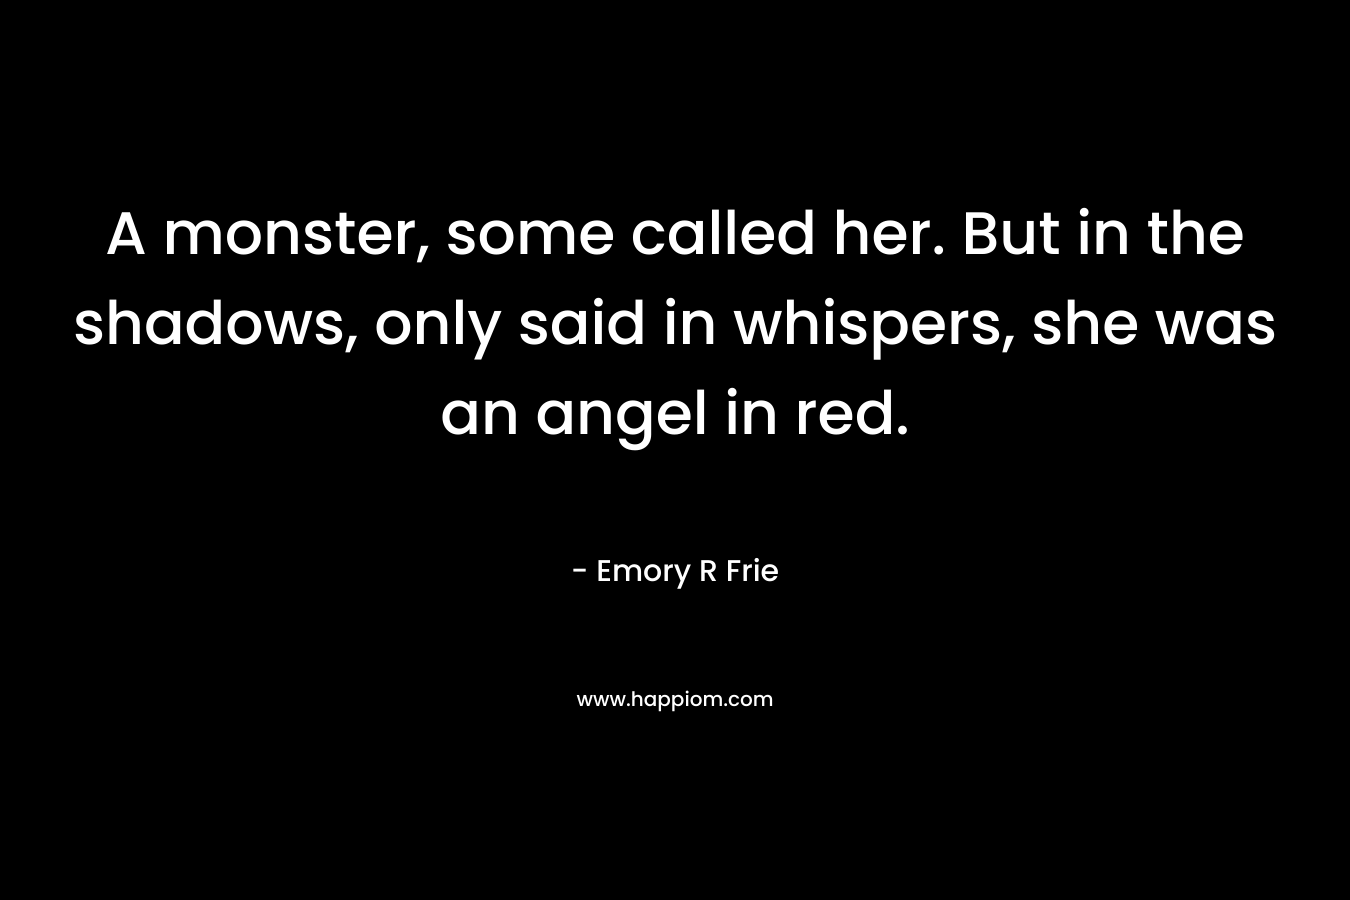 A monster, some called her. But in the shadows, only said in whispers, she was an angel in red. – Emory R Frie